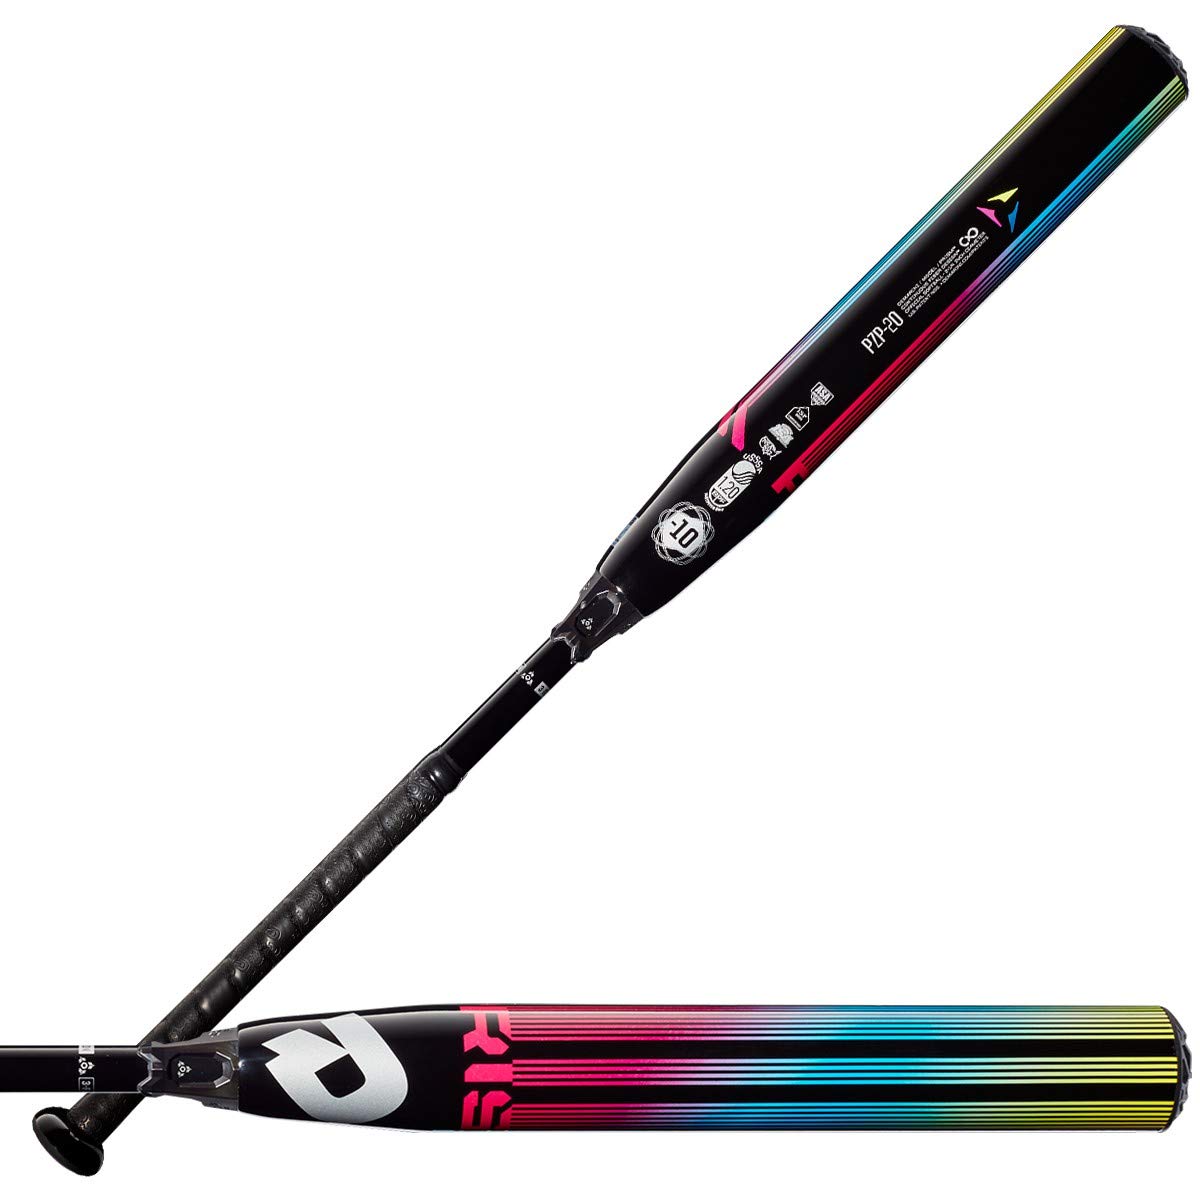 `-10 Length to Weight Ratio. 2.25 Inch Barrel Diameter Balanced Swing Weight CFX Technology with New End Cap Technology 3Fusion Technology System Approved for Play In ASA, USSSA, ISA, NSA and ISF